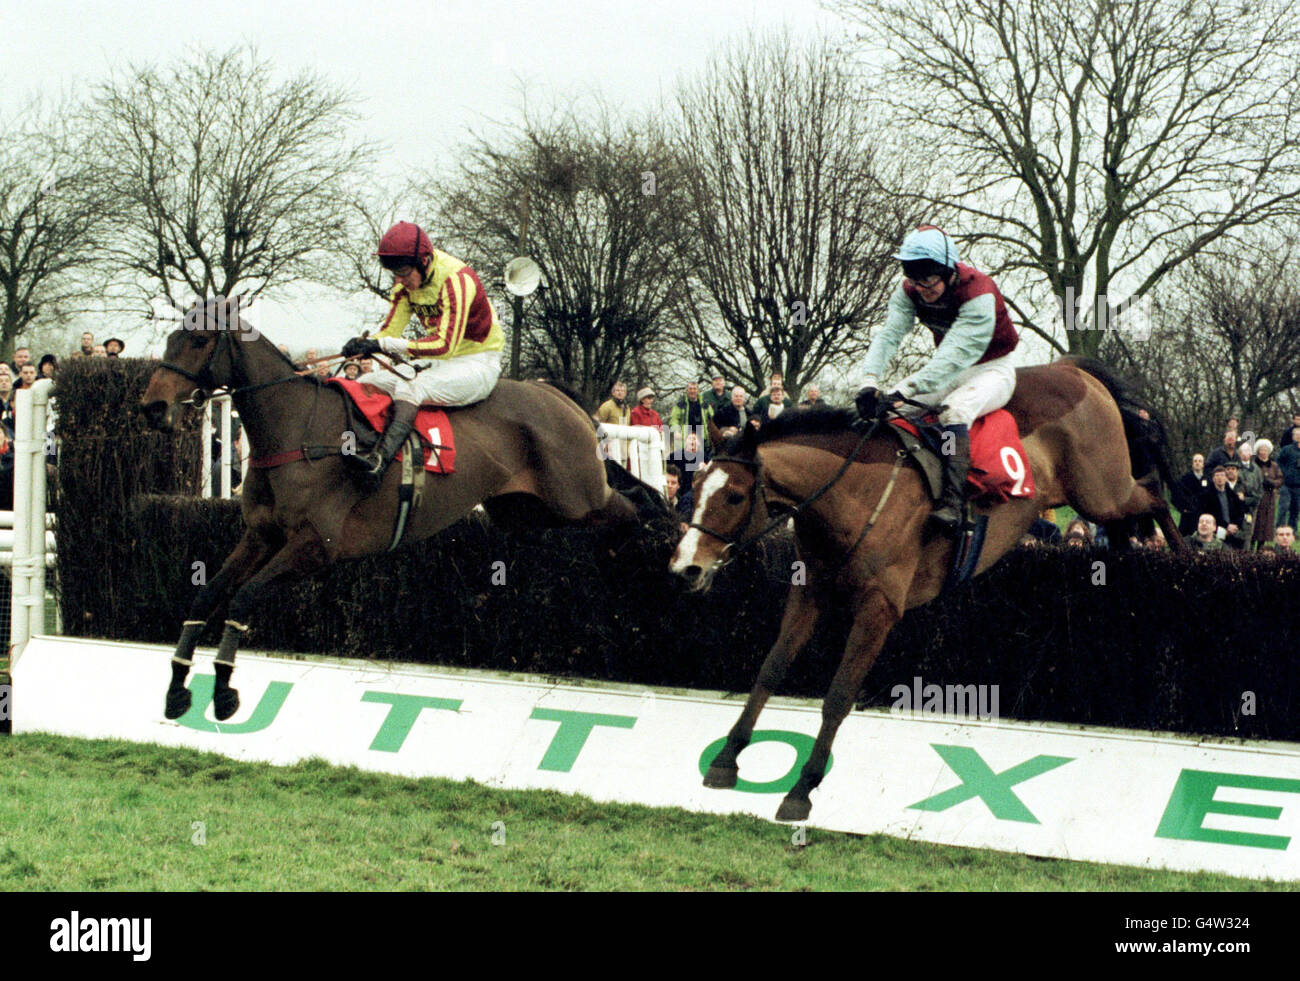 Sad Mad Bad (No.9) with Alan Dempsey about to touch down ahead of In The Blood, to win the ukbetting.com. Steeple Chase at Uttoxeter, entering the record books as the first winner of the millennium. Stock Photo